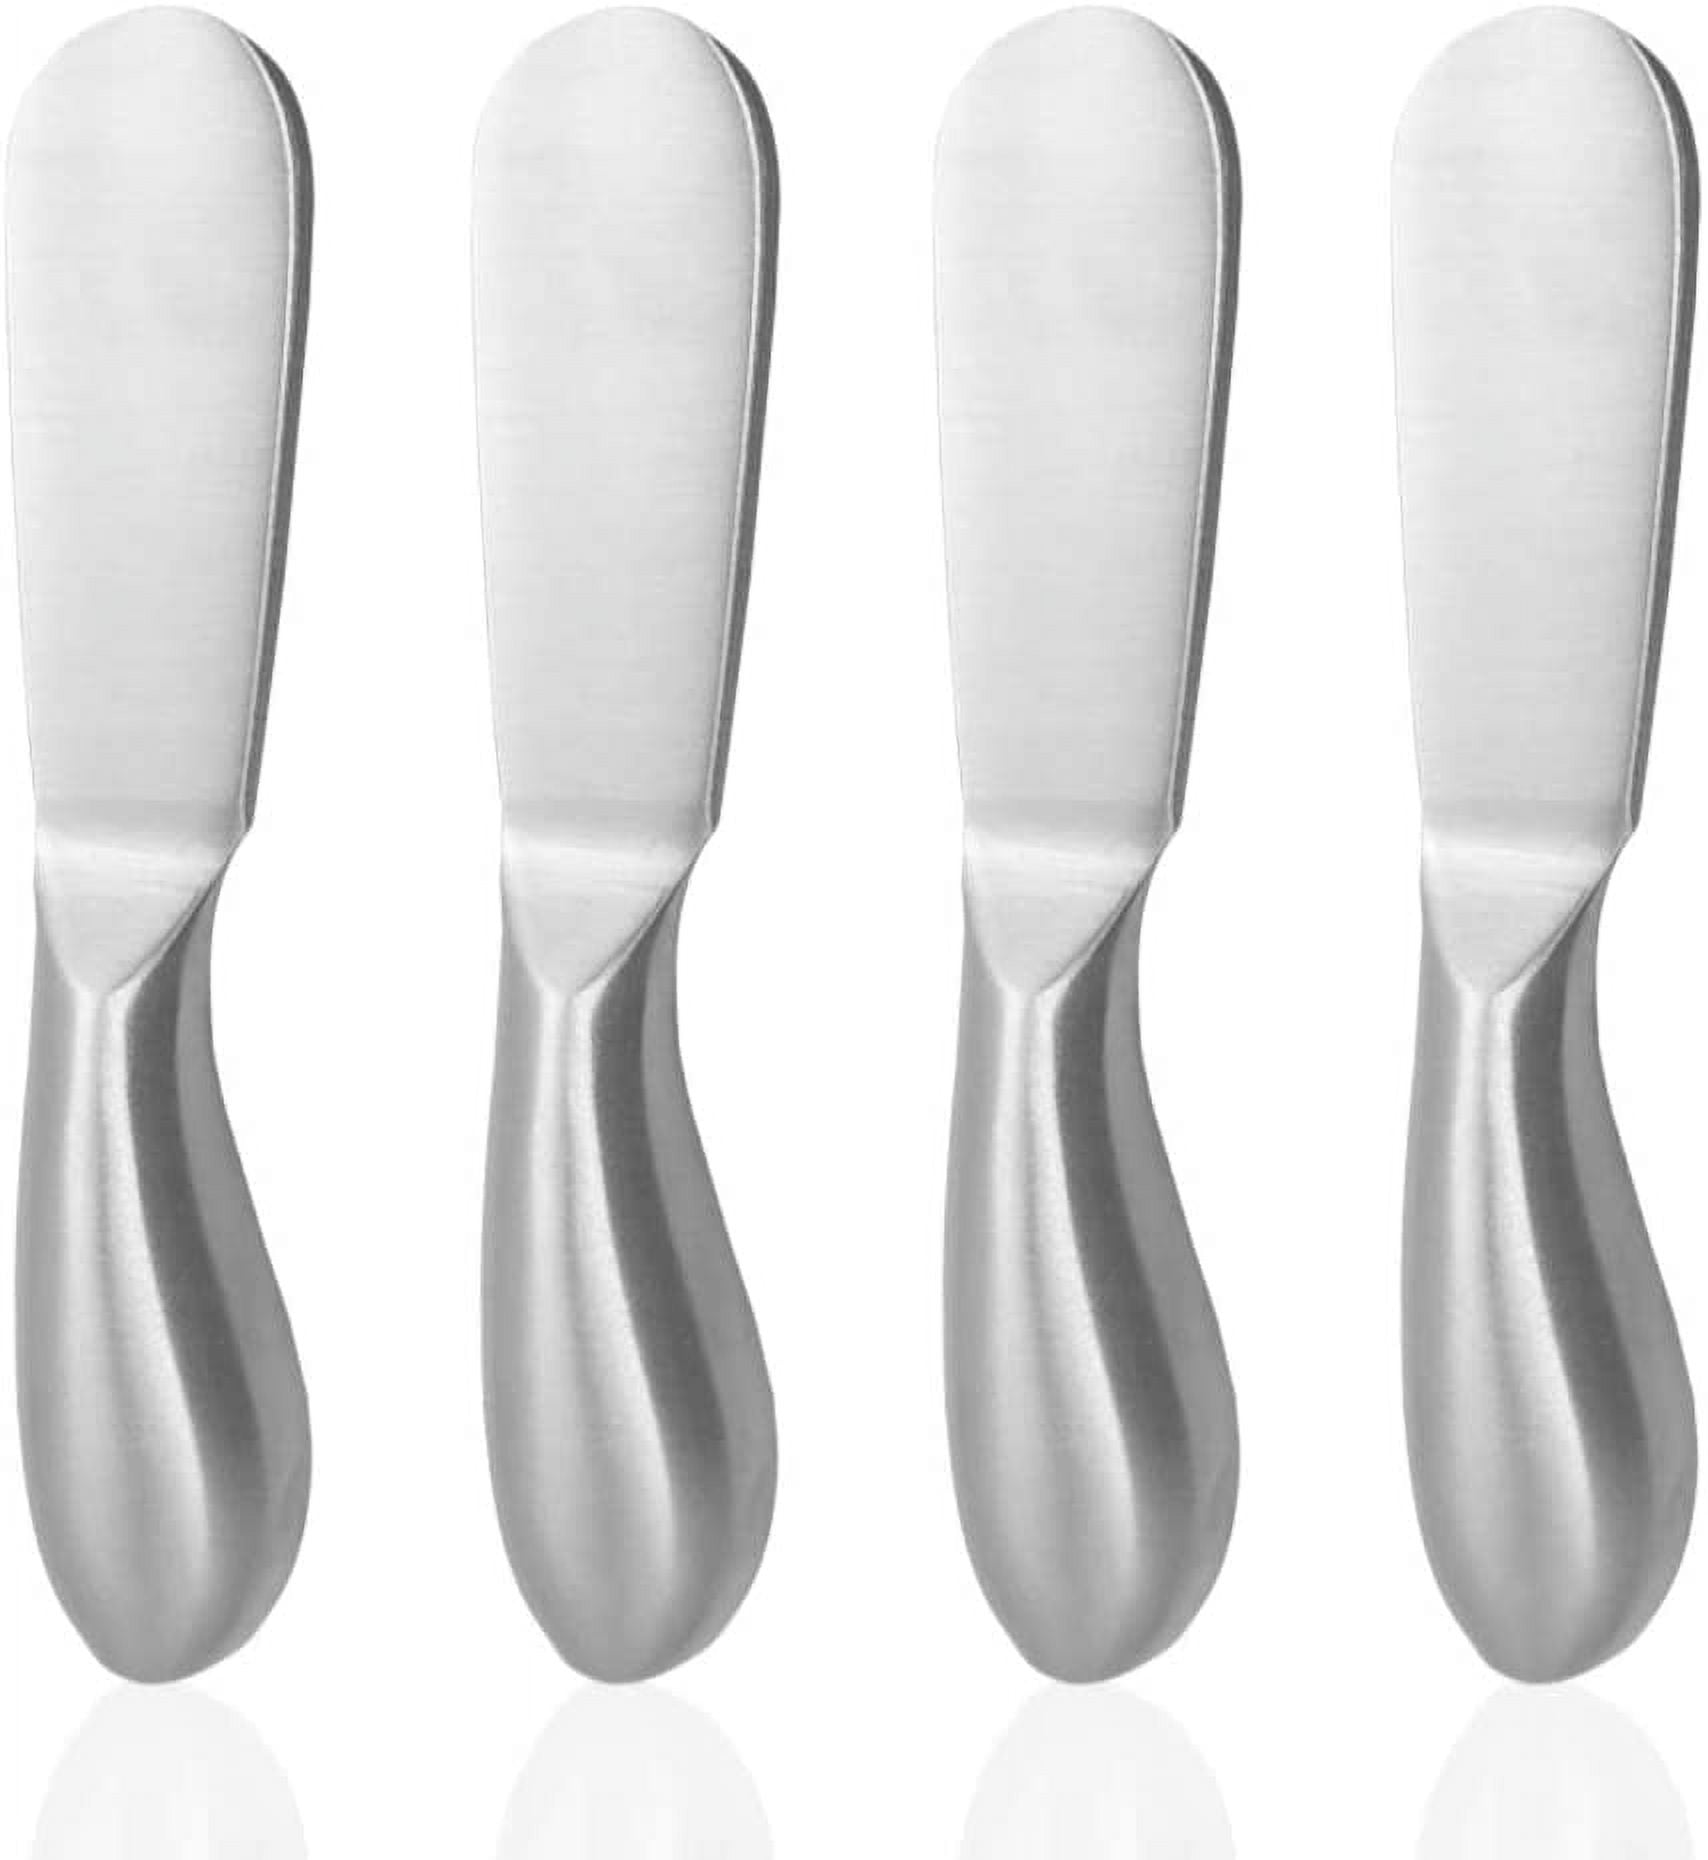 CNHNGTS Crysto Stainless Steel Butter Knife, Butter Spreader, Breakfast  Spreads,Cheese and Condiments (4pcs)